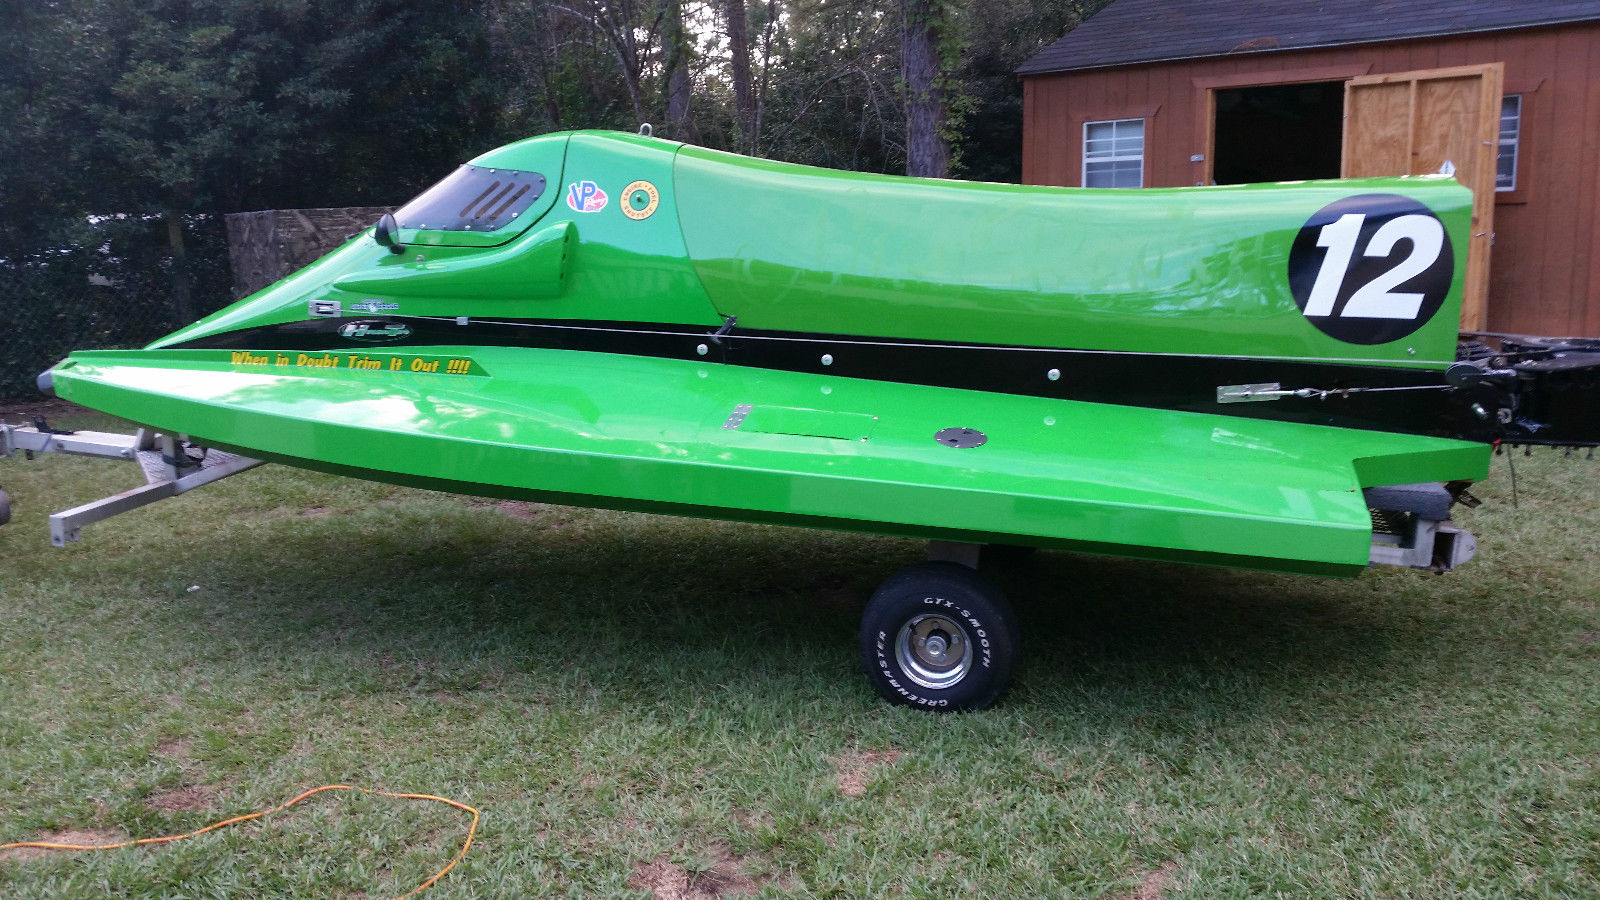 SEEBOLD F1 OR F2 1999 for sale for $5,000 - Boats-from-USA.com